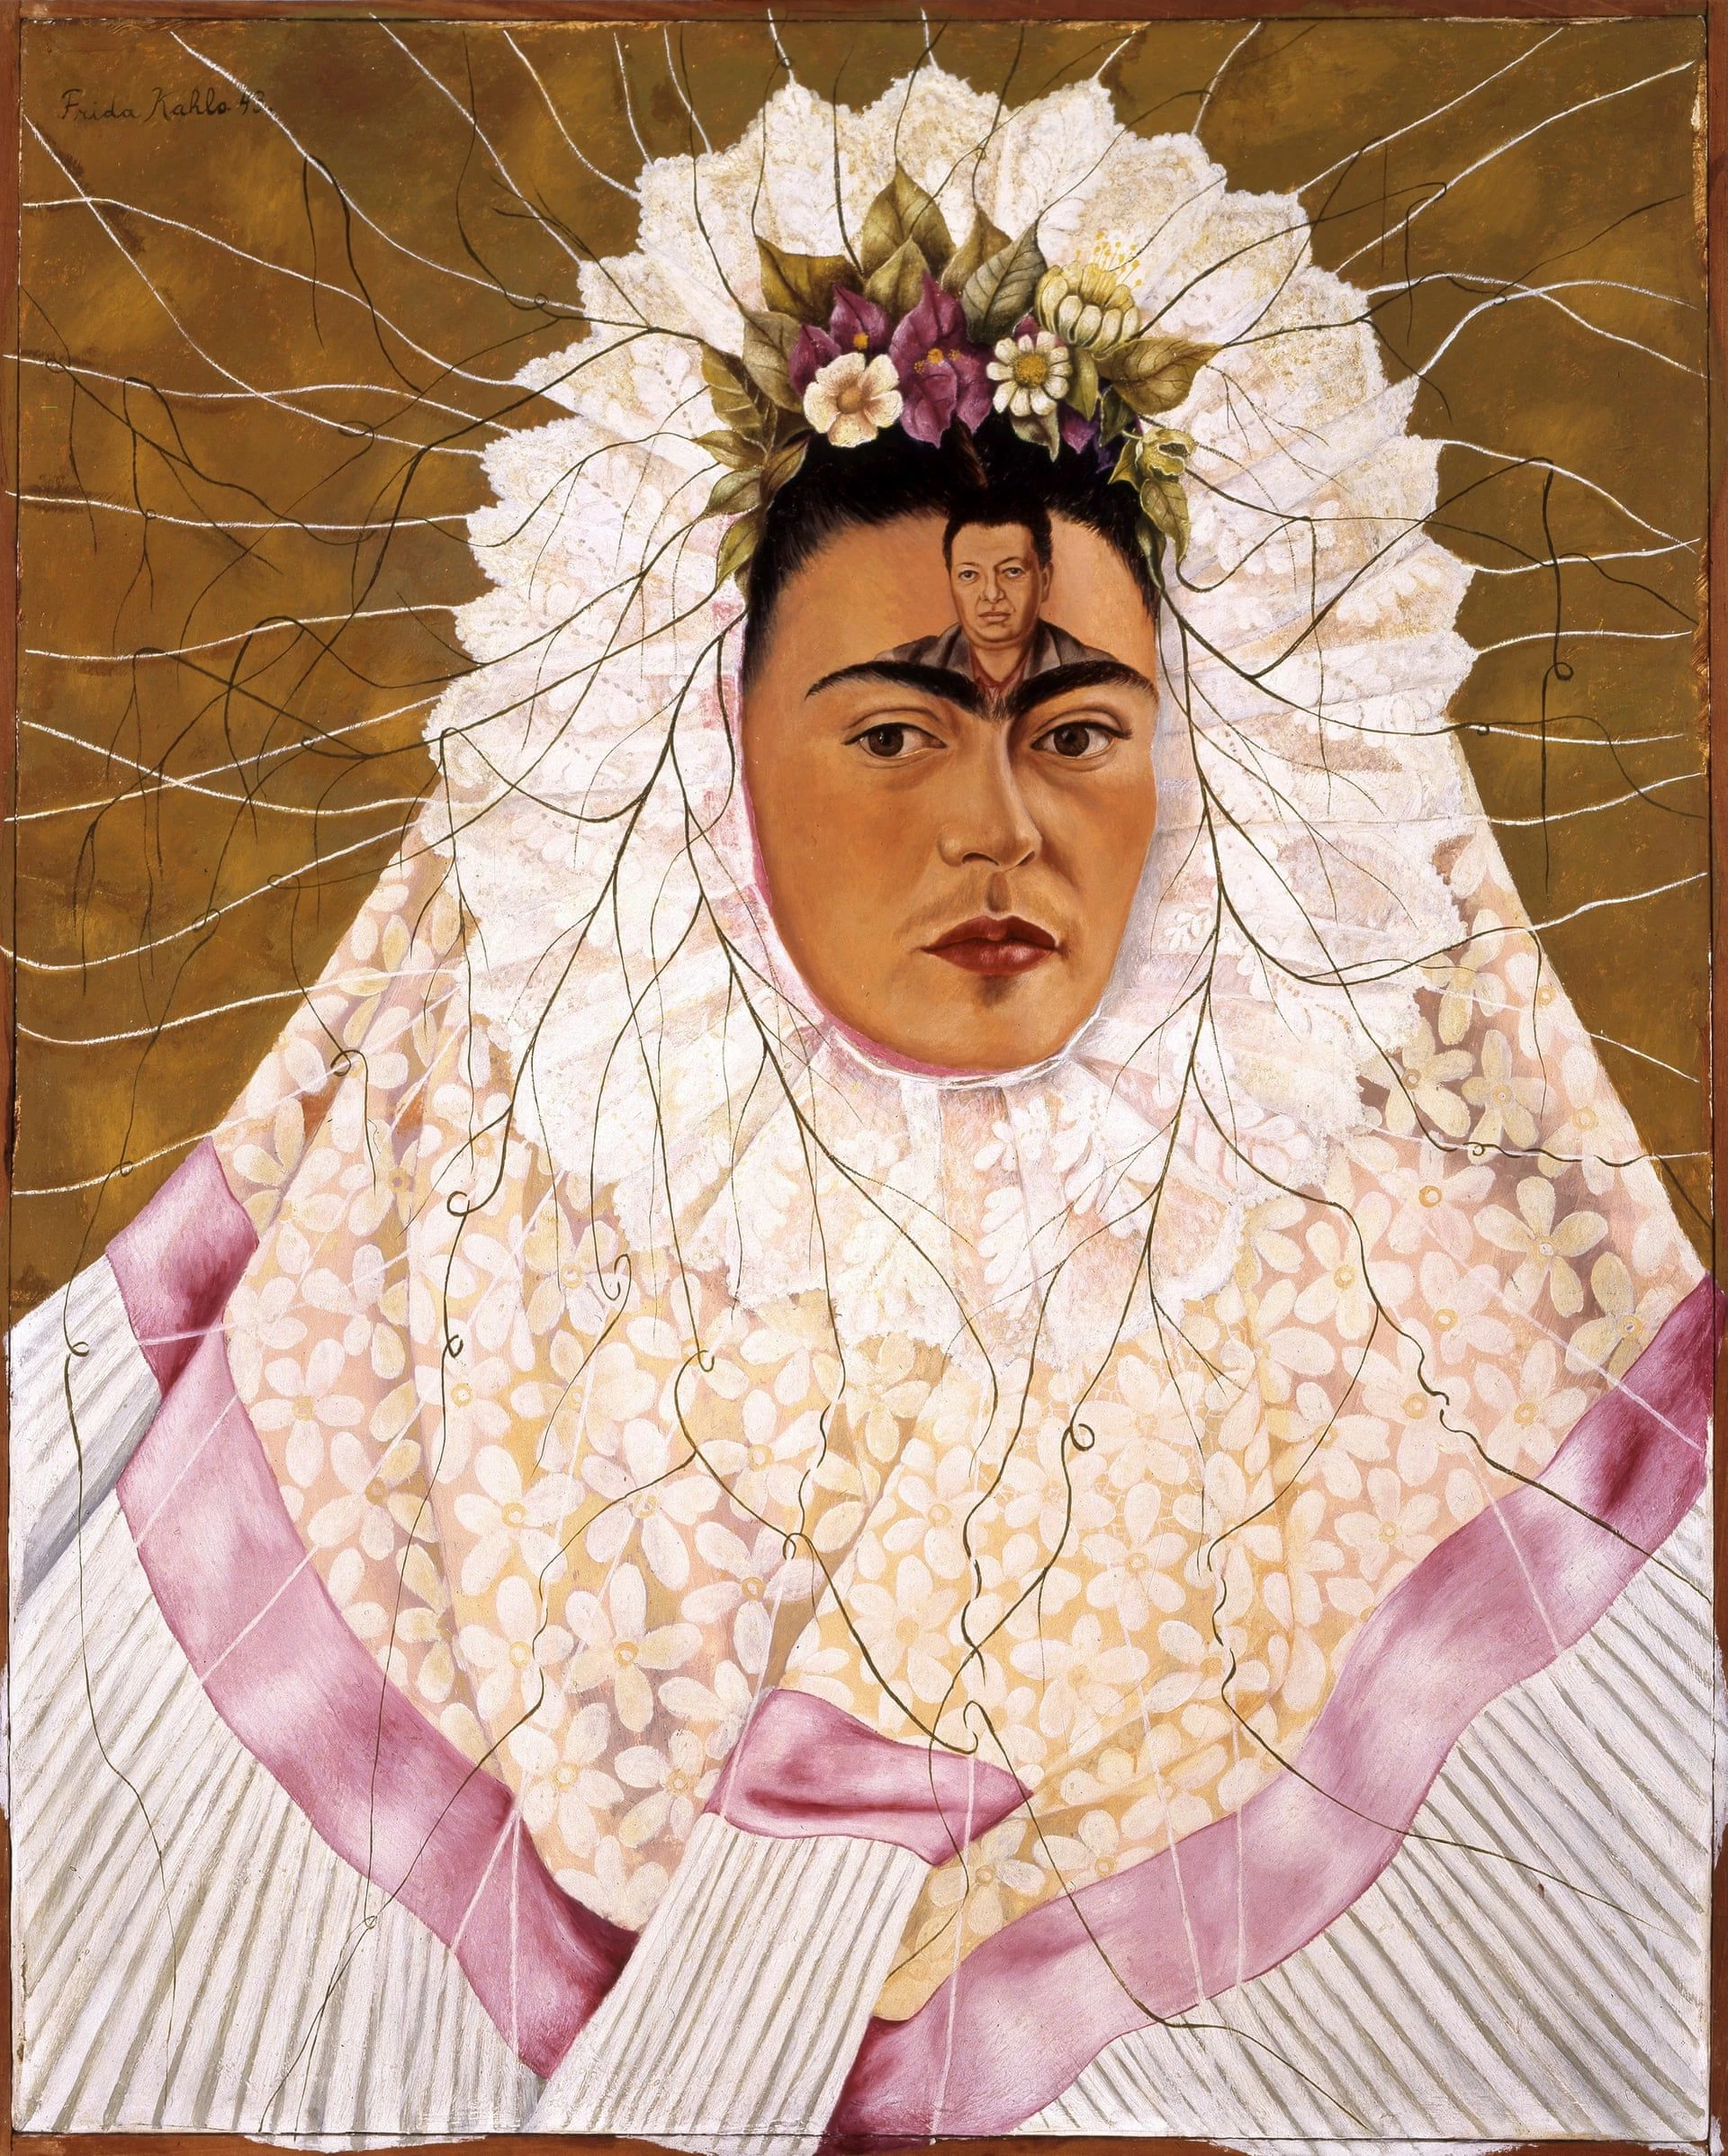 Self-Portrait as a Tehuana (Diego in My Thoughts), Frida Kahlo